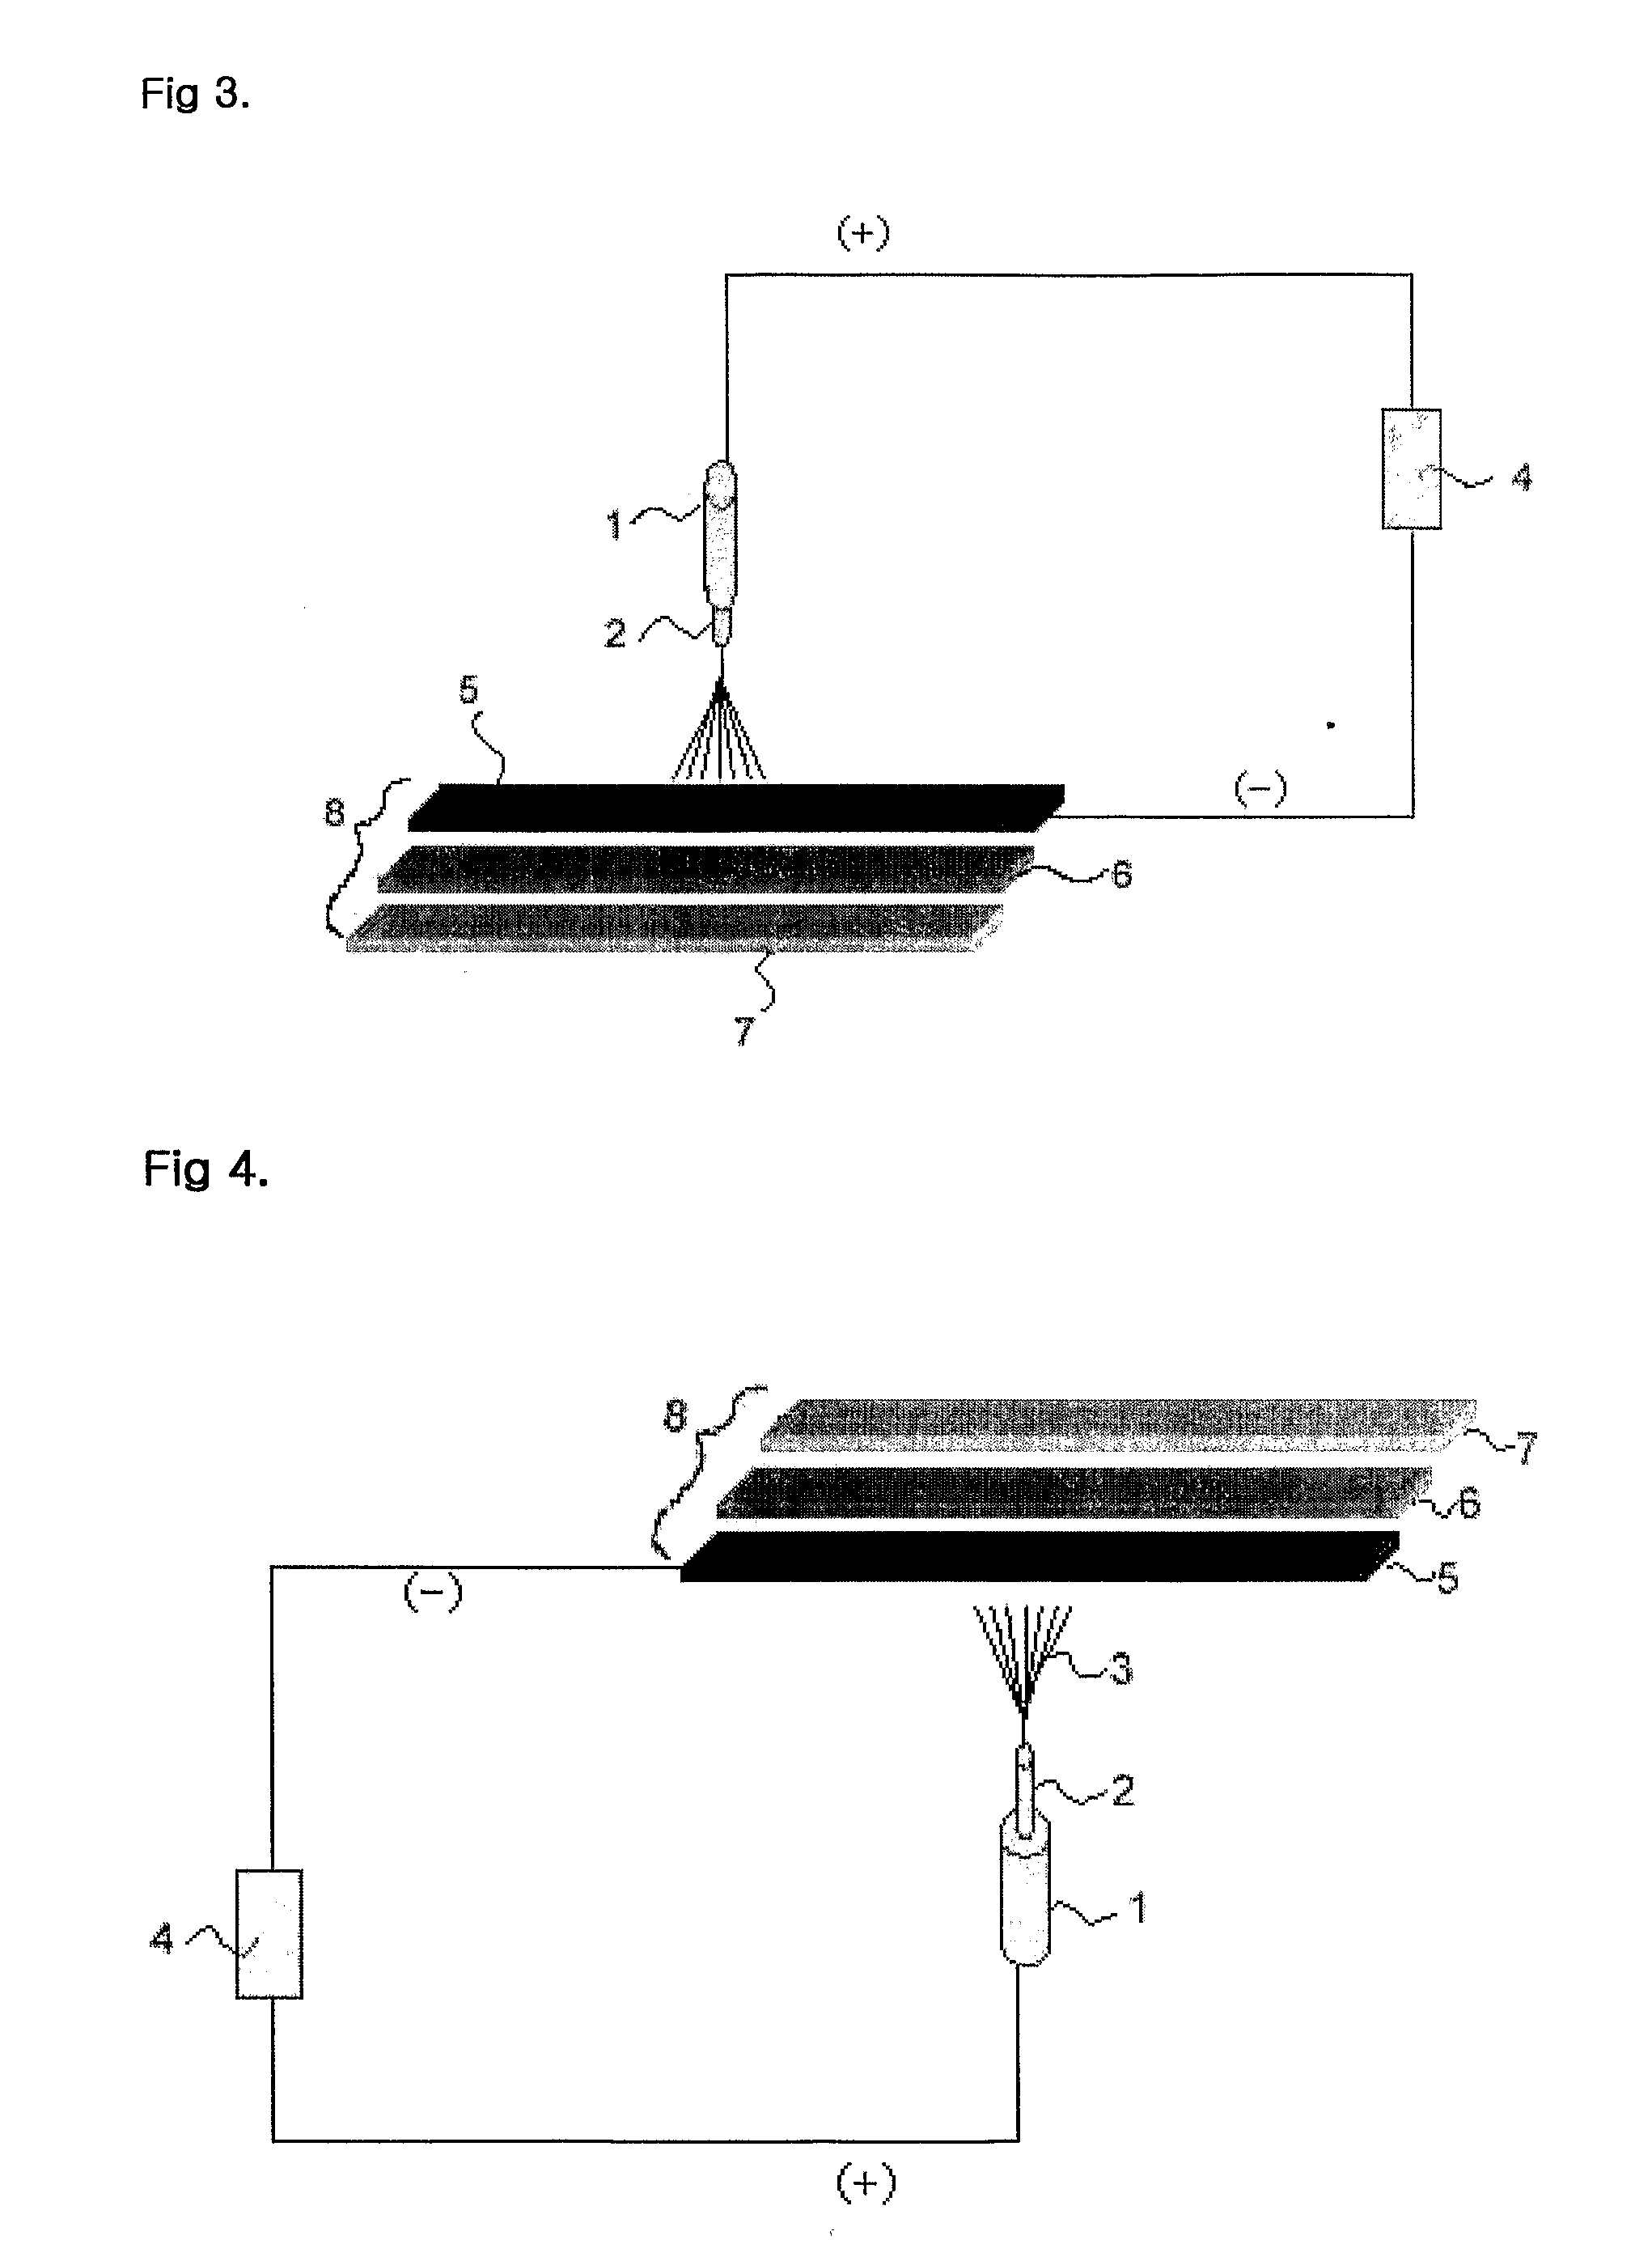 Method of manufacturing nano-fibers with excellent fiber formation